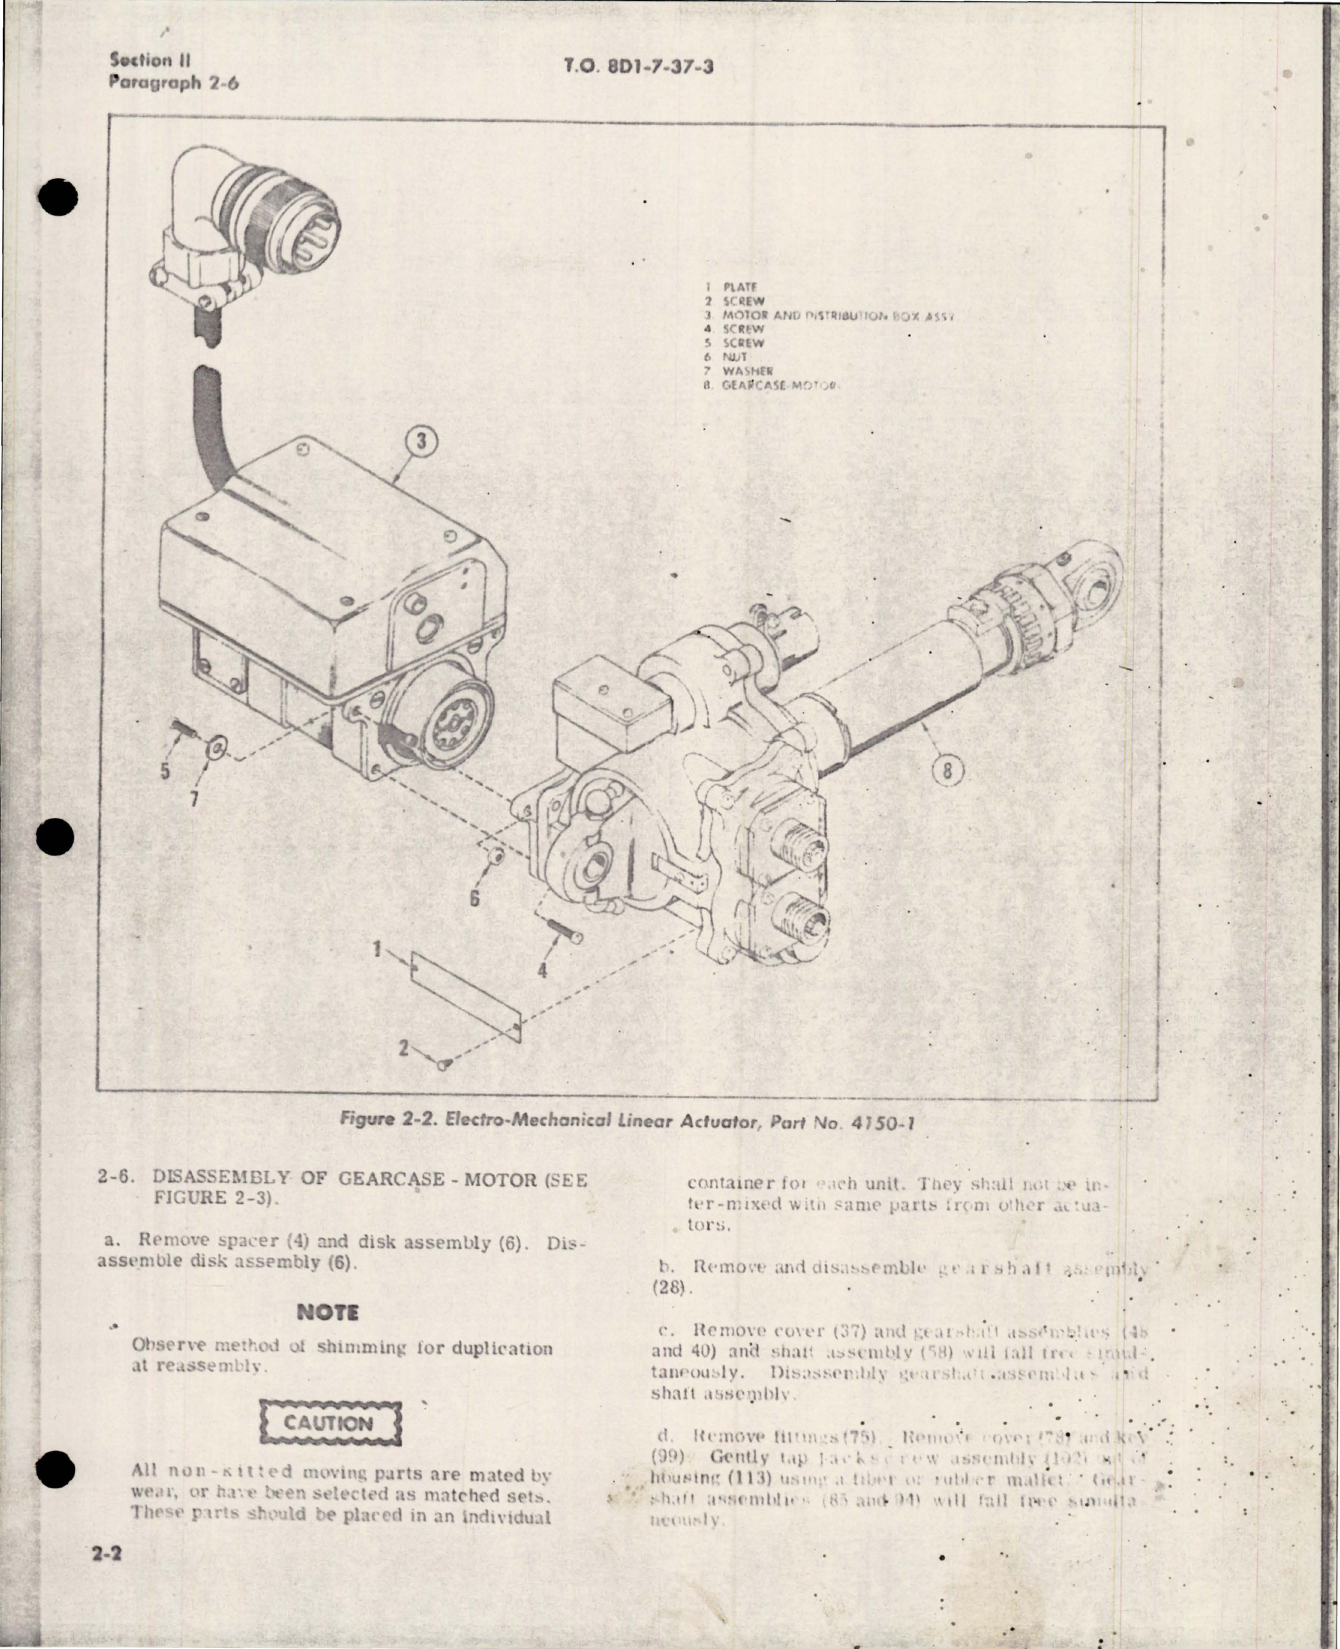 Sample page 7 from AirCorps Library document: Overhaul for Electro-Mechanical Rotary Actuator - Parts 4150-1 and 4150-2 